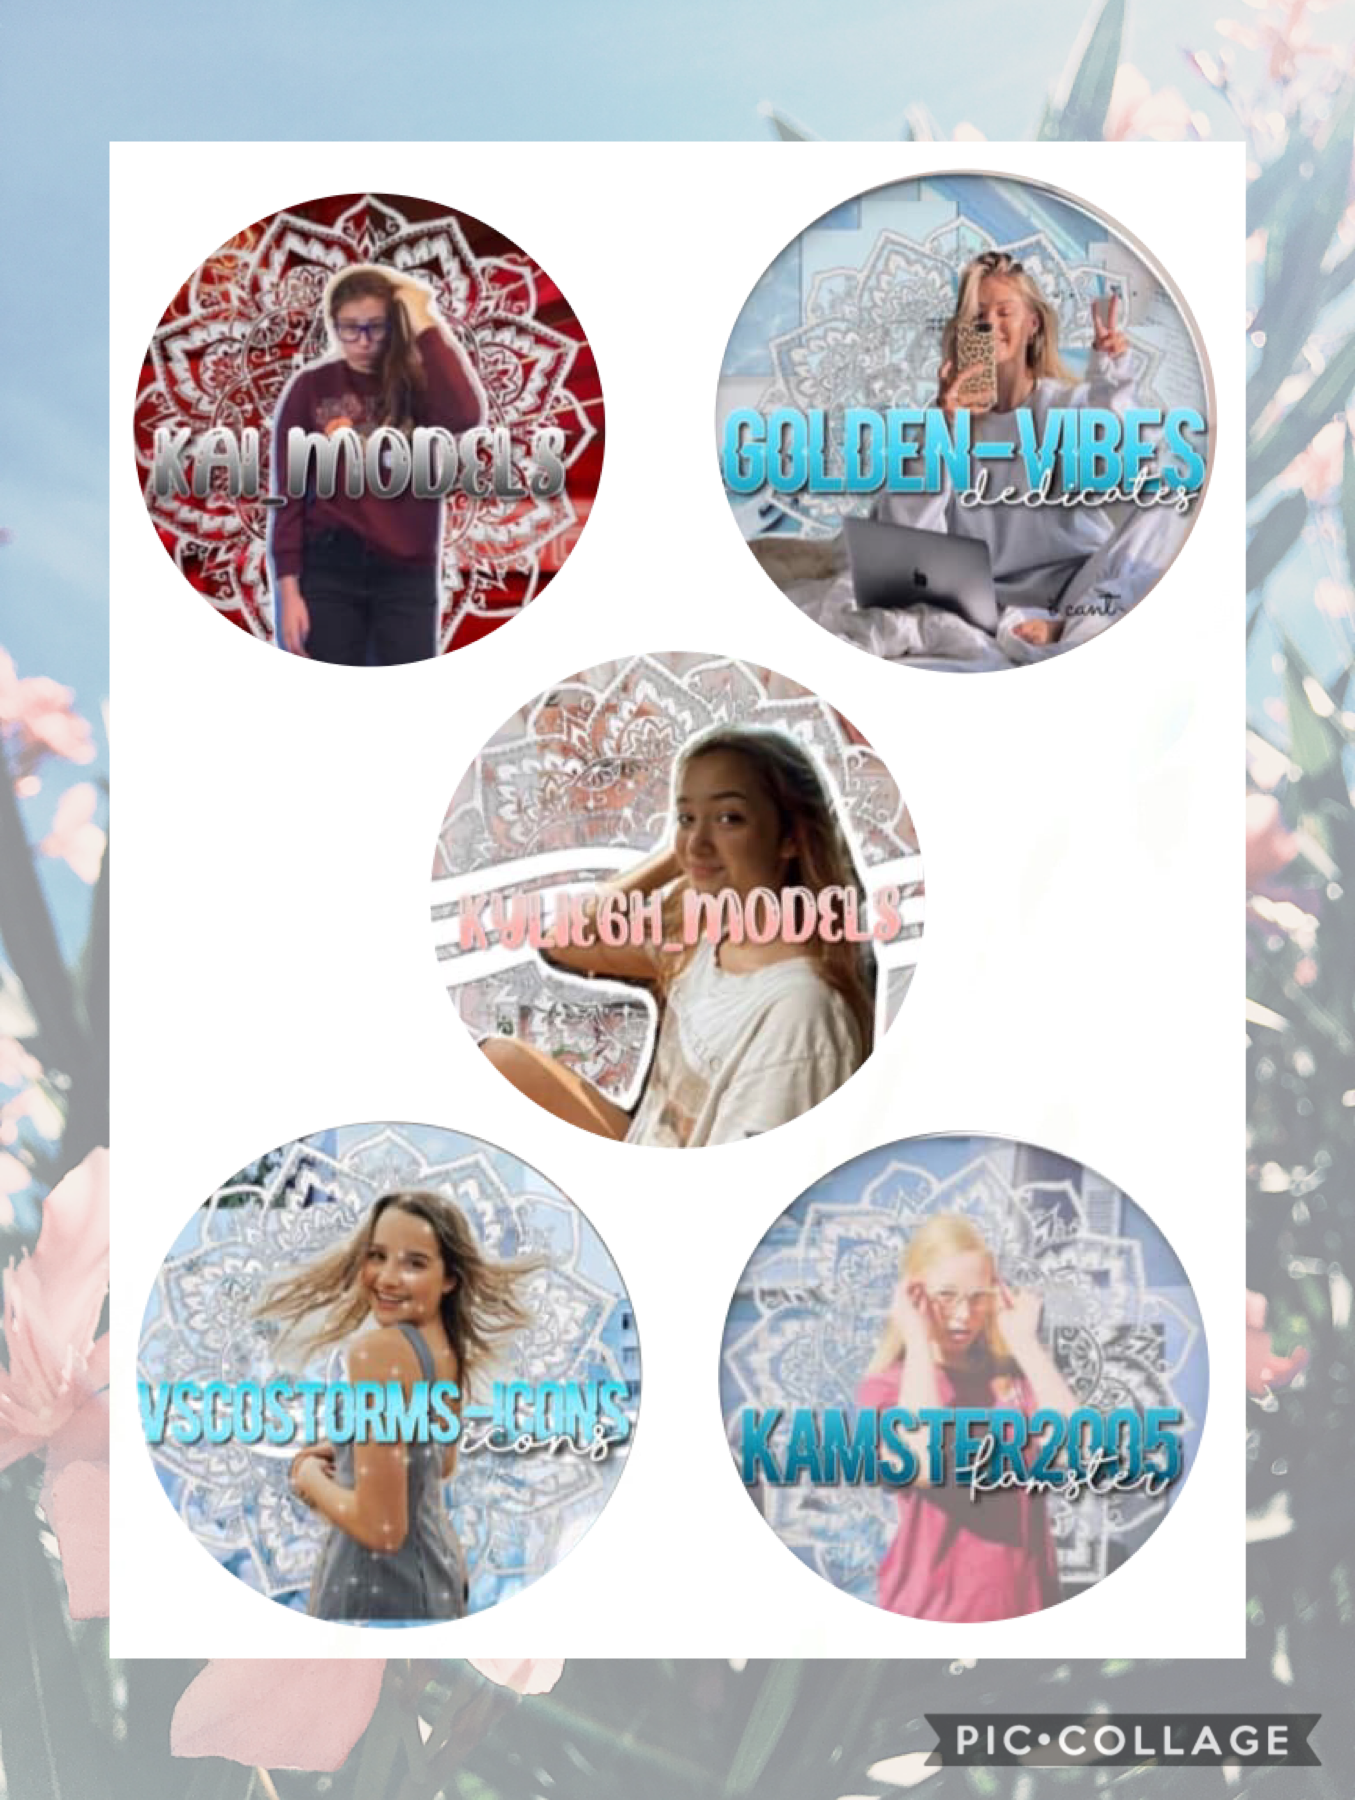 Here are some of our icons! 